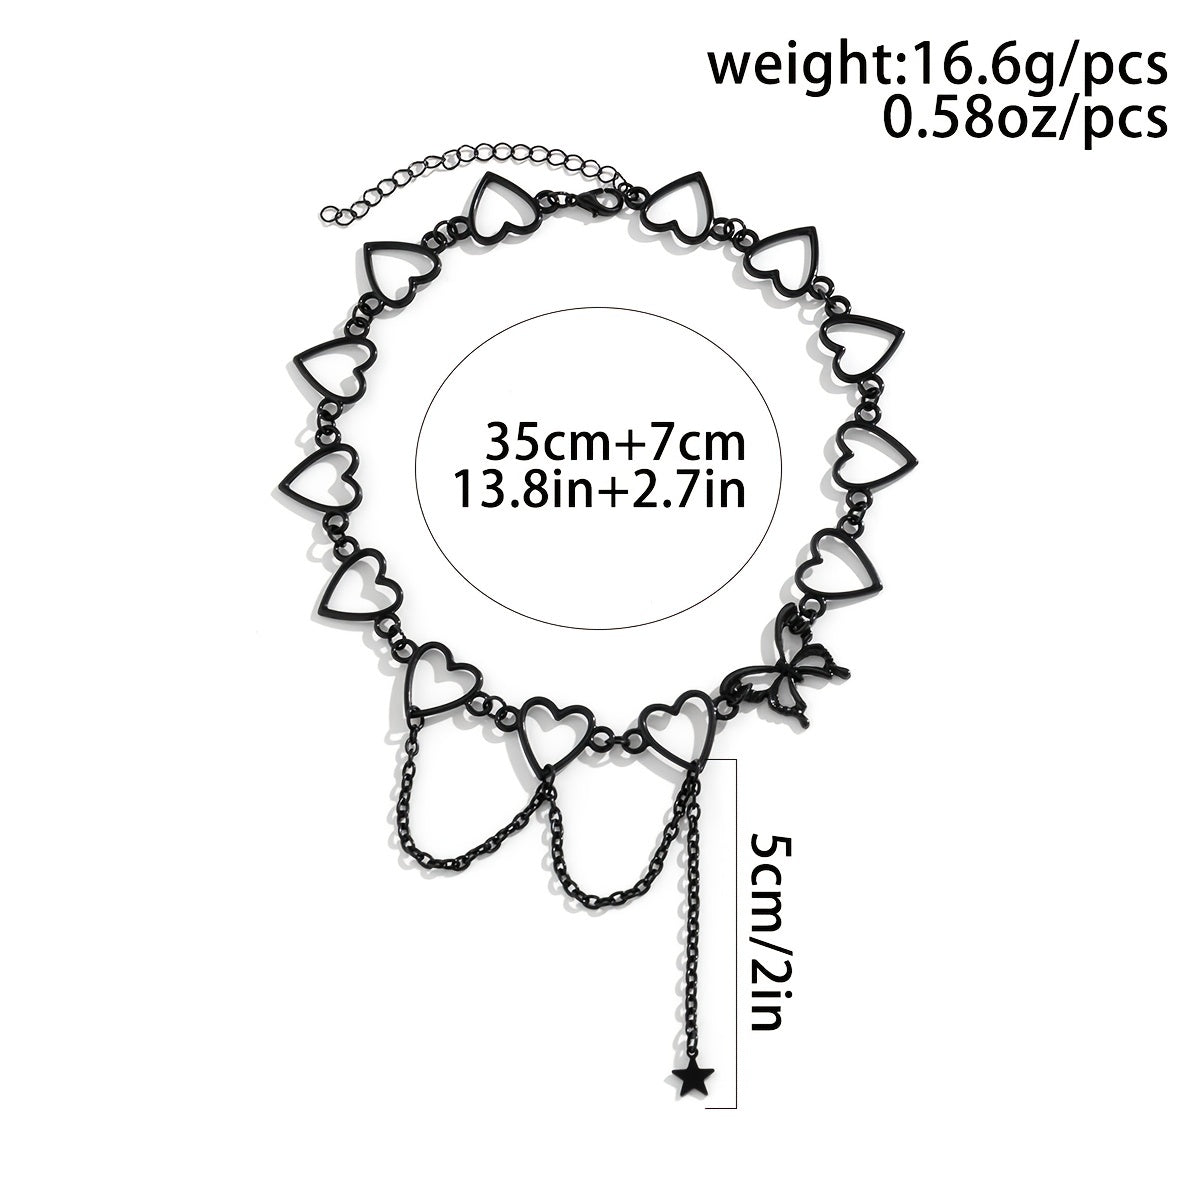 Punk Style Hollow Heart Choker Necklace With Star Shape Pendant Hollow Chain Tassel Adjustable Neck Jewelry Decoration For Women & Girls Party Clothings Accessories